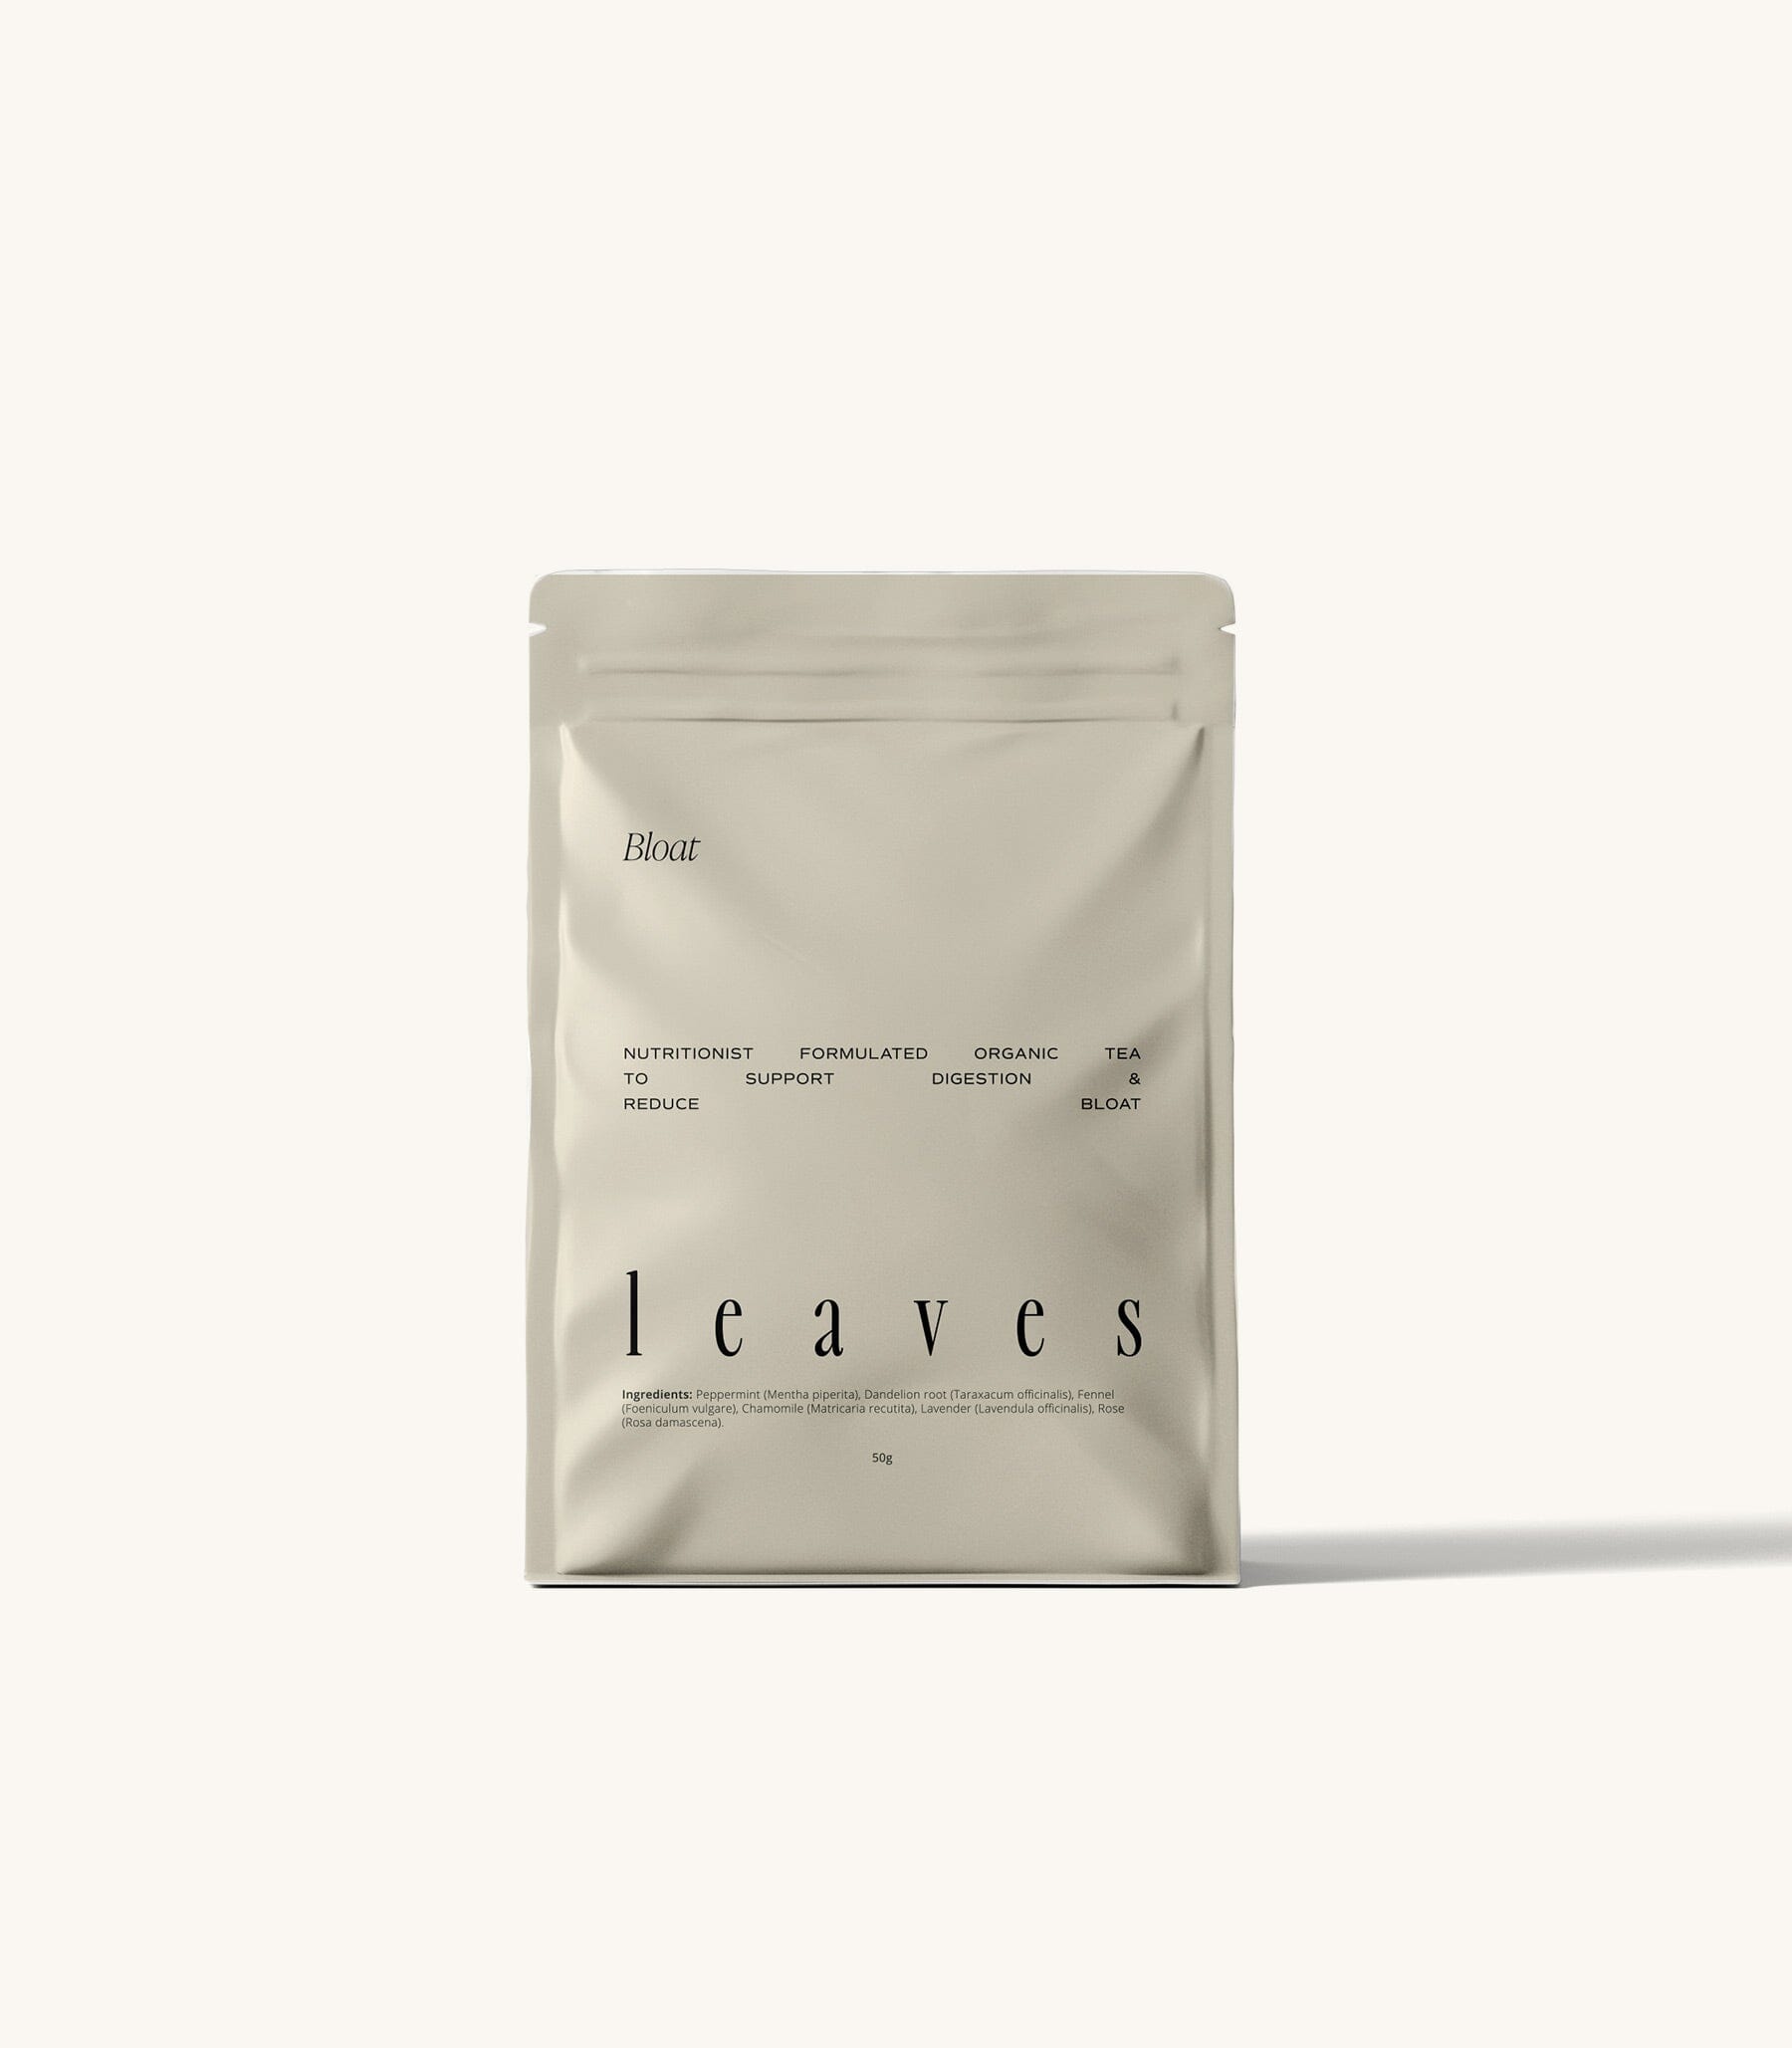 Bloat tea pouch standing on a cream background 